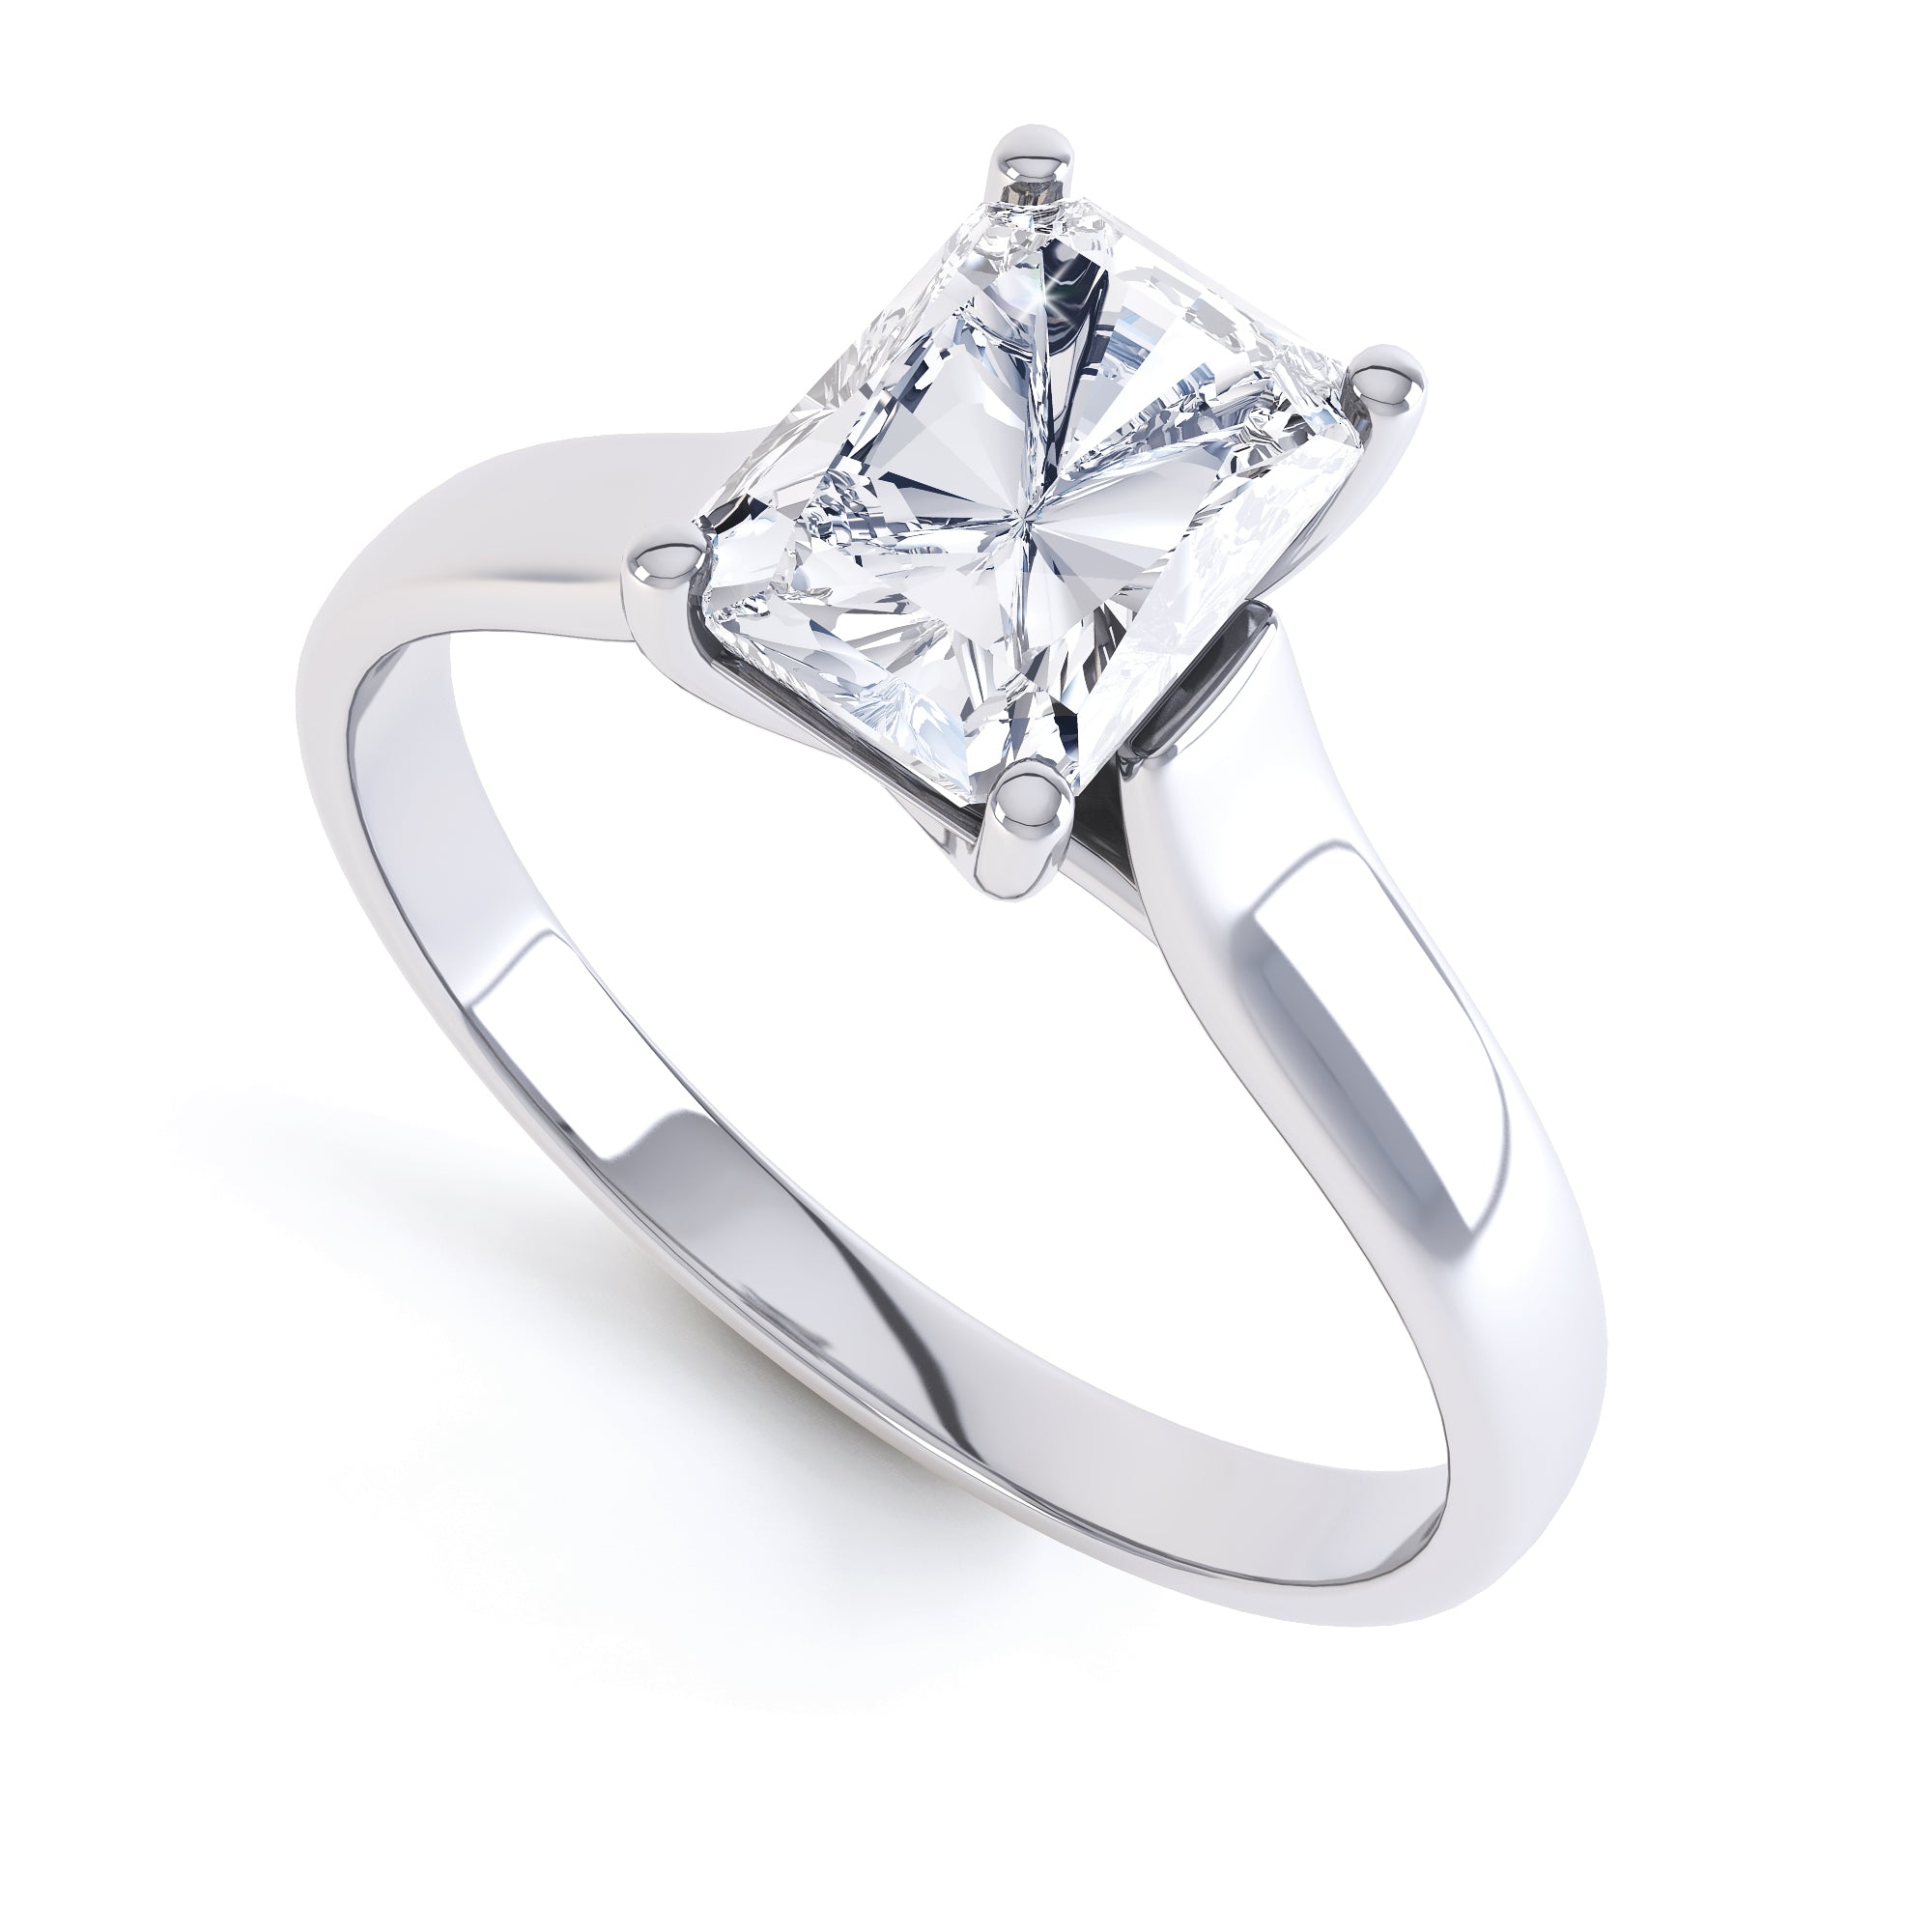 Radiant Cut Centre Stone, 4 claw, Diamond Engagement Ring with Parrallel Shoulders